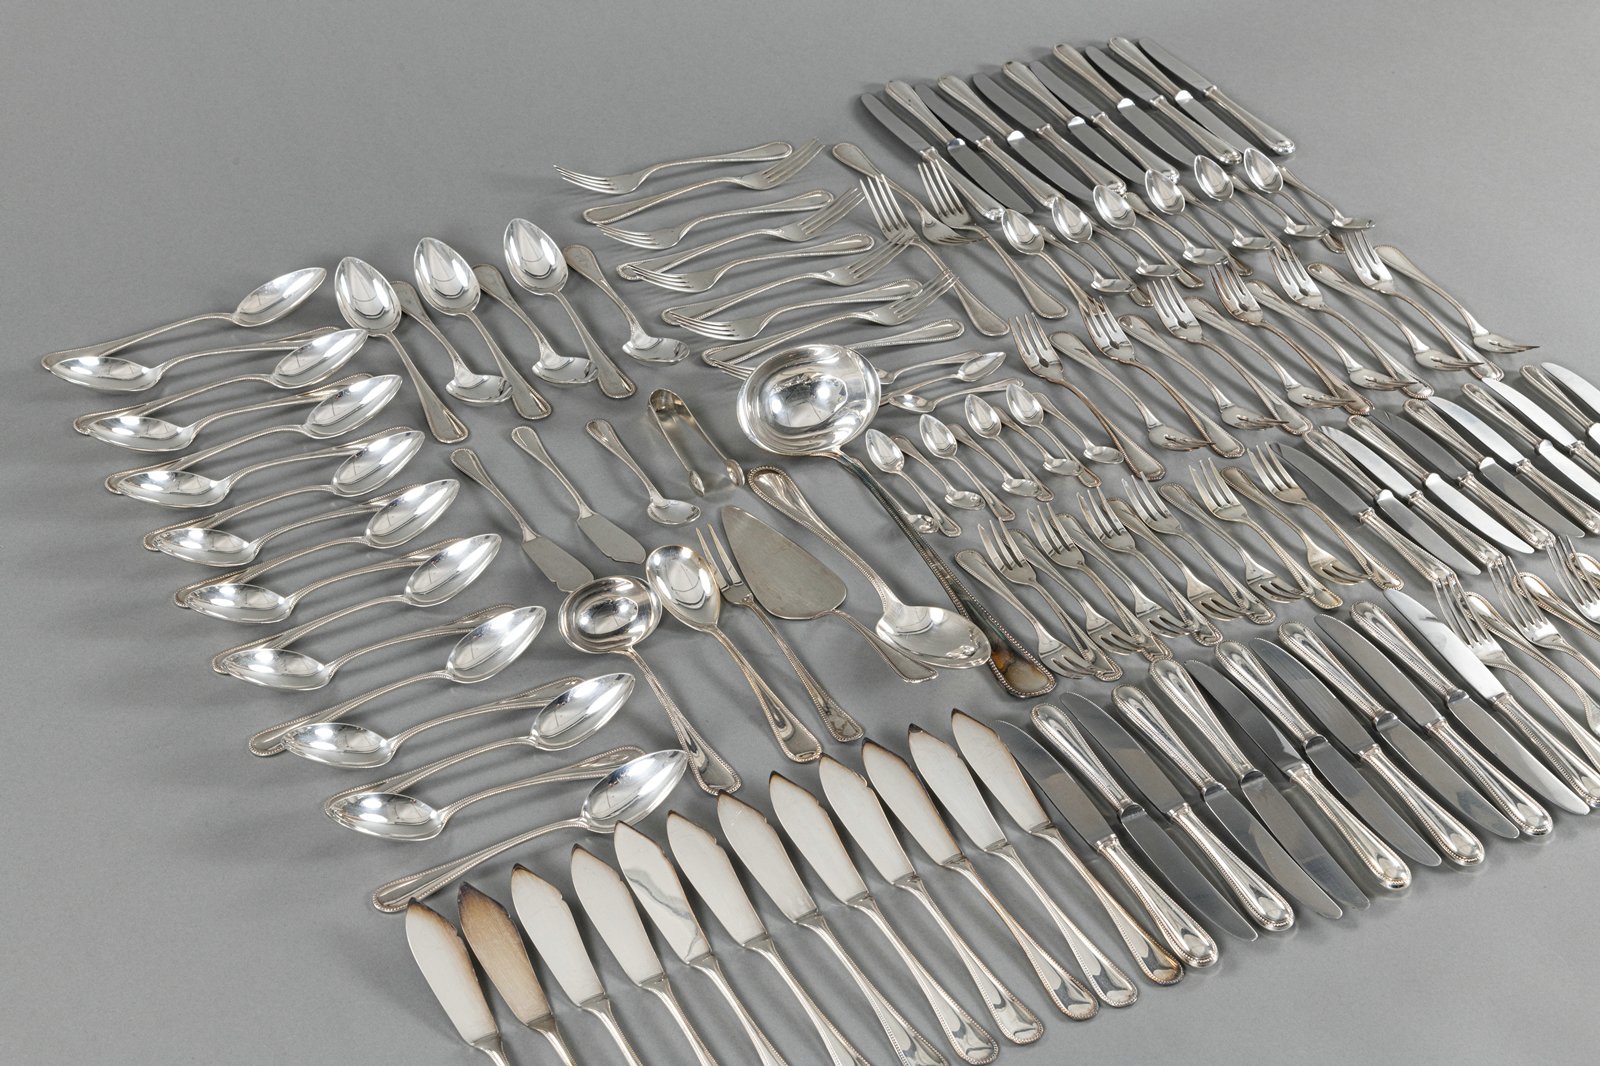 A SILVER CUTLERY FOR MOSTLY 11-12 PEOPLE - Image 6 of 12